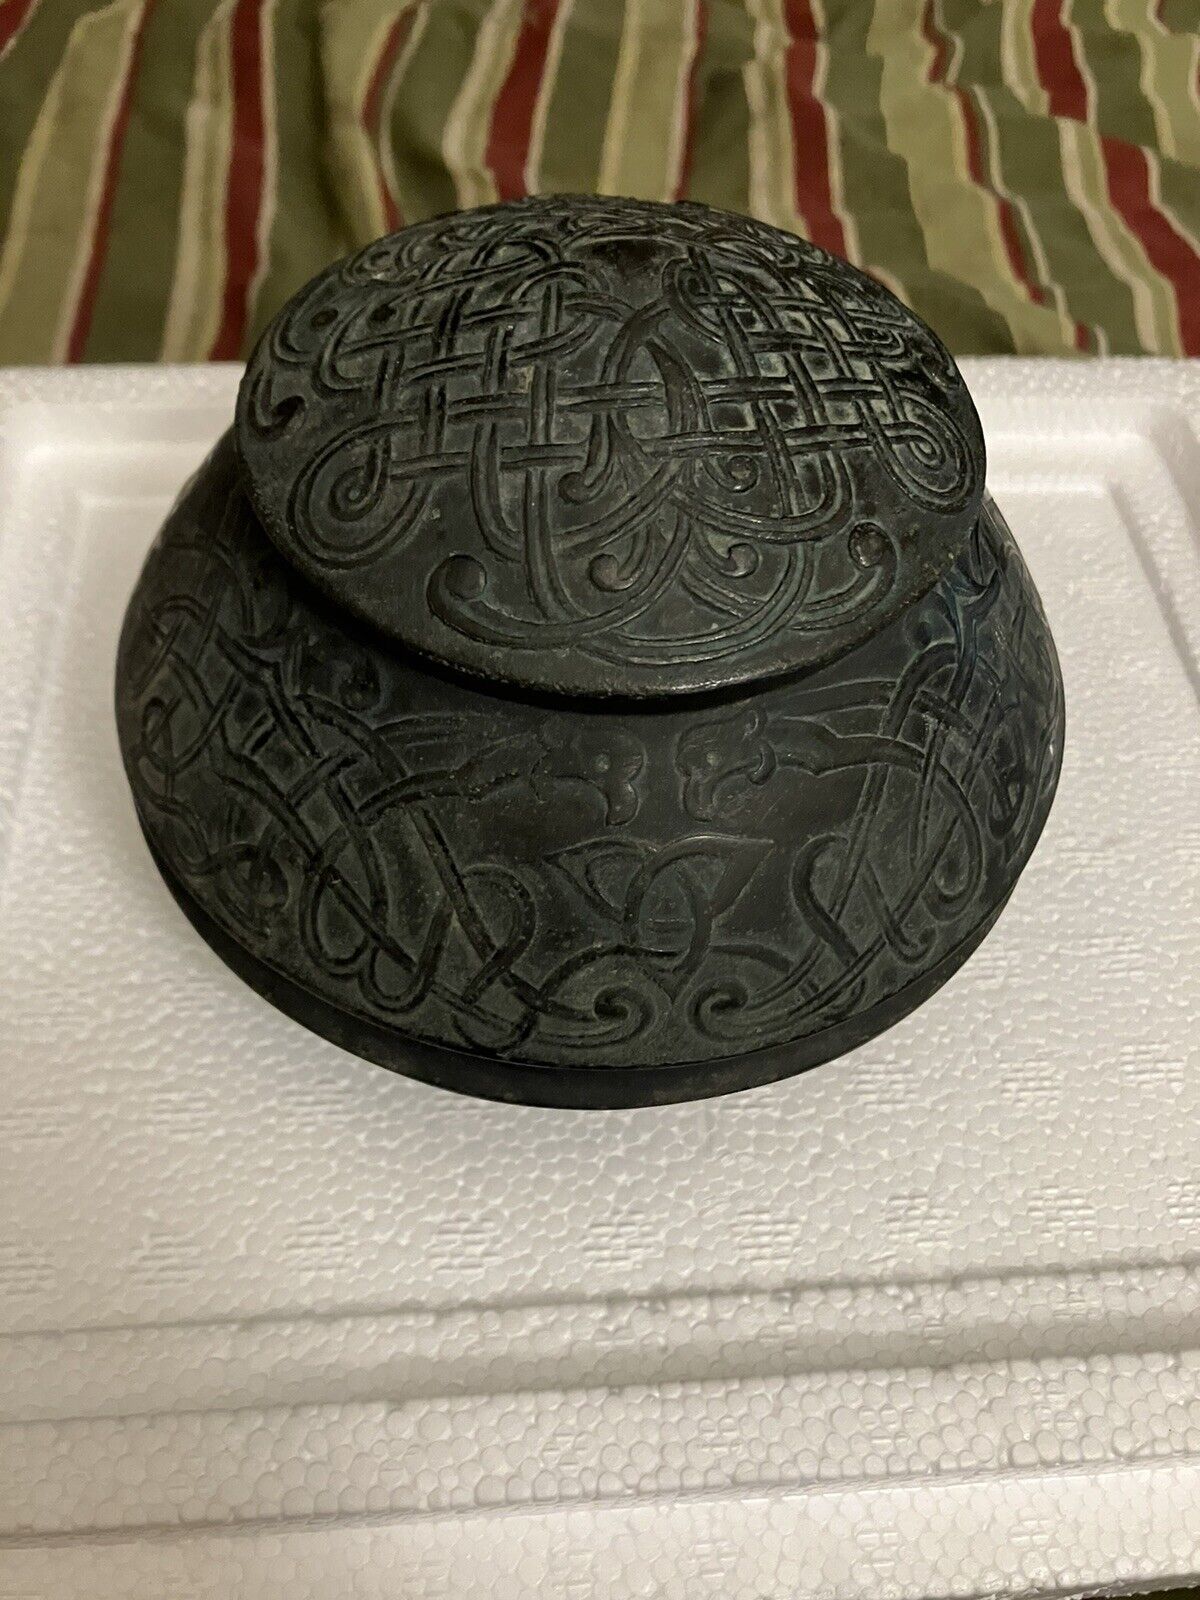 ANTIQUE MARSHALL FIELD & CO LARGE BRONZE INKWELL CELTIC KNOT - NO INK BOTTLE